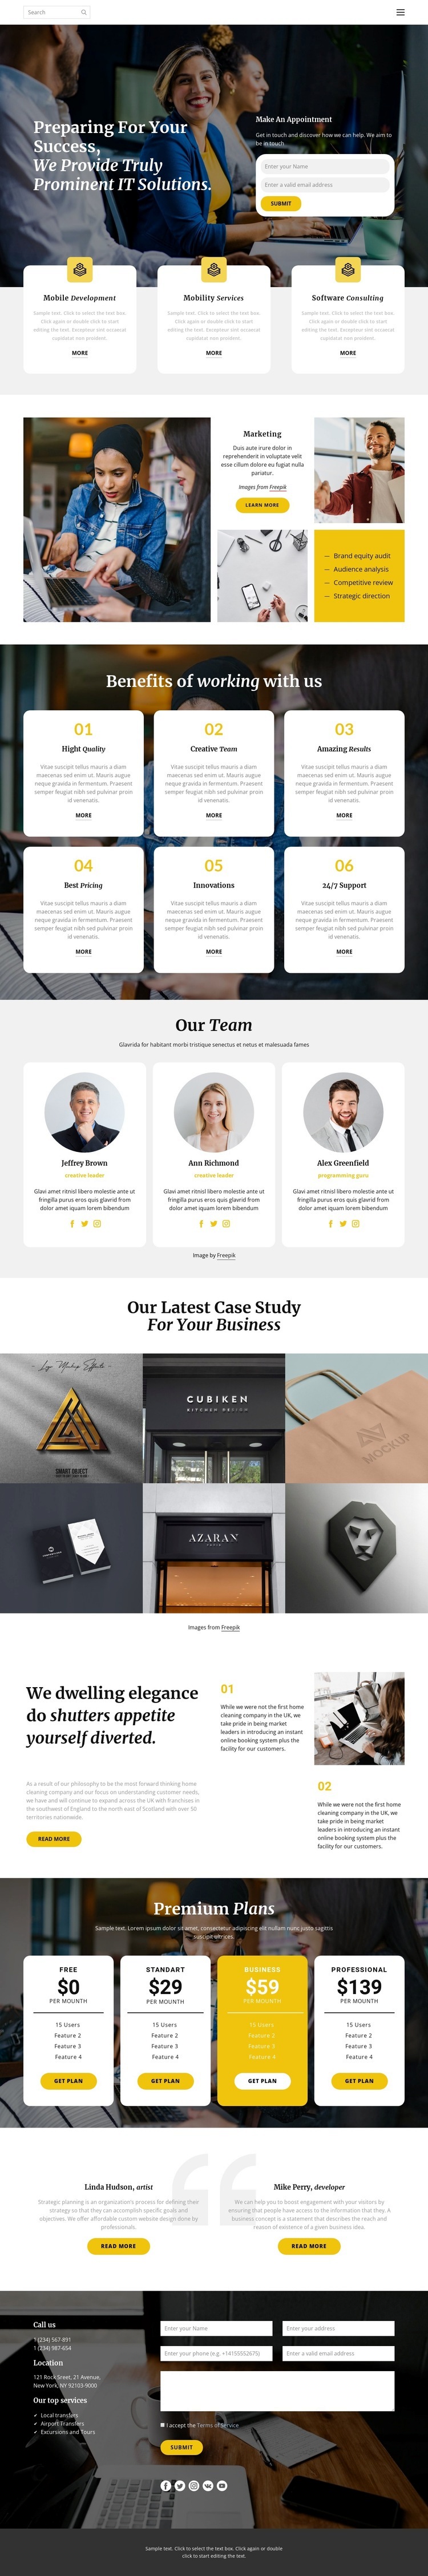 Joint-stock company Homepage Design